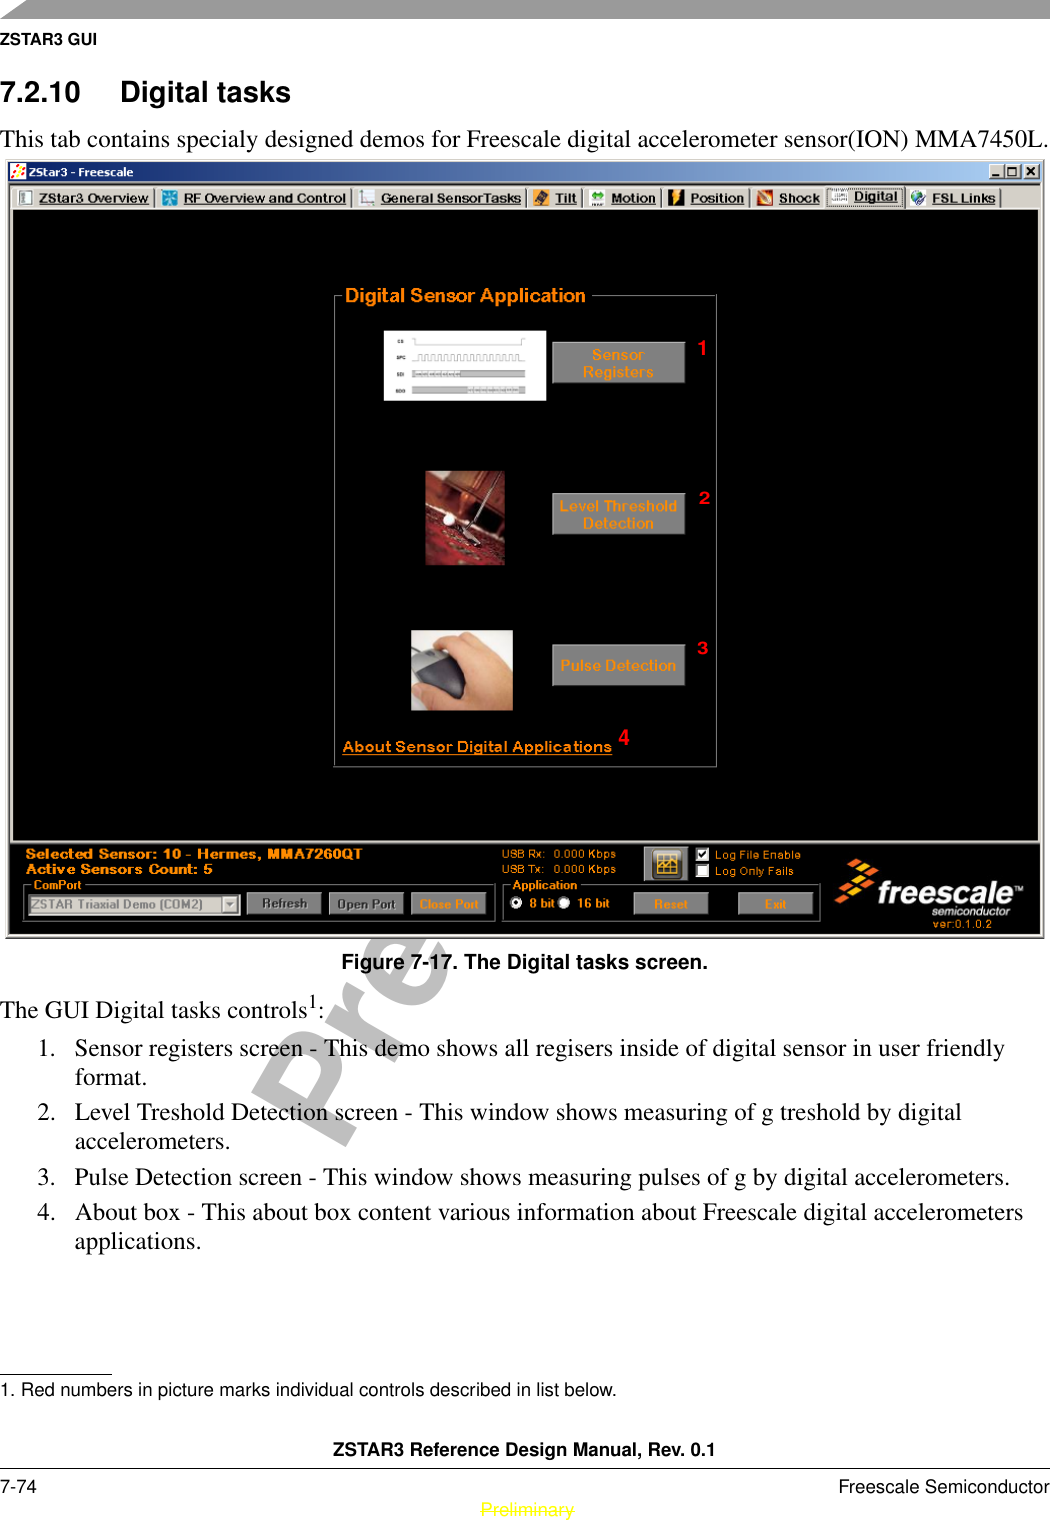 ZSTAR3 GUIZSTAR3 Reference Design Manual, Rev. 0.17-74 Freescale Semiconductor PreliminaryPreliminary7.2.10 Digital tasksThis tab contains specialy designed demos for Freescale digital accelerometer sensor(ION) MMA7450L.Figure 7-17. The Digital tasks screen.The GUI Digital tasks controls1: 1. Sensor registers screen - This demo shows all regisers inside of digital sensor in user friendly format.2. Level Treshold Detection screen - This window shows measuring of g treshold by digital accelerometers.3. Pulse Detection screen - This window shows measuring pulses of g by digital accelerometers.4. About box - This about box content various information about Freescale digital accelerometers applications.1. Red numbers in picture marks individual controls described in list below.1234